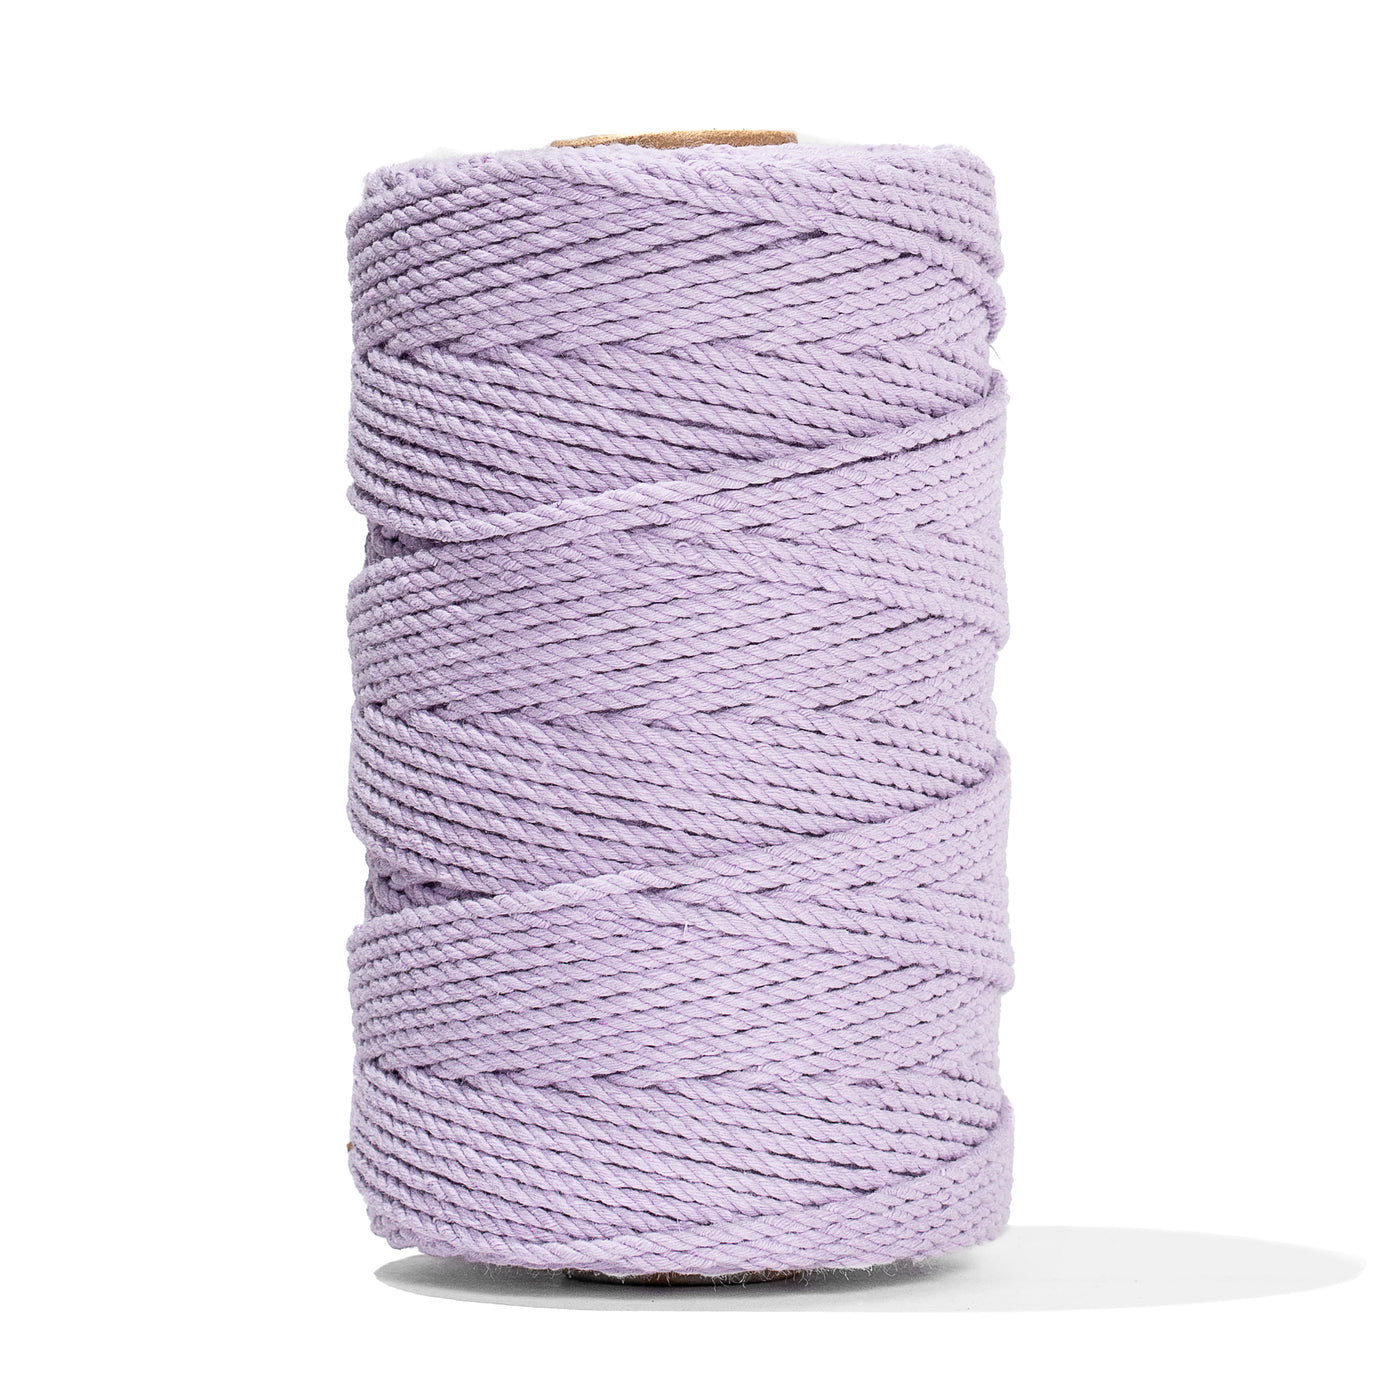 COTTON ROPE ZERO WASTE 2 MM - 3 PLY - LILAC COLOR